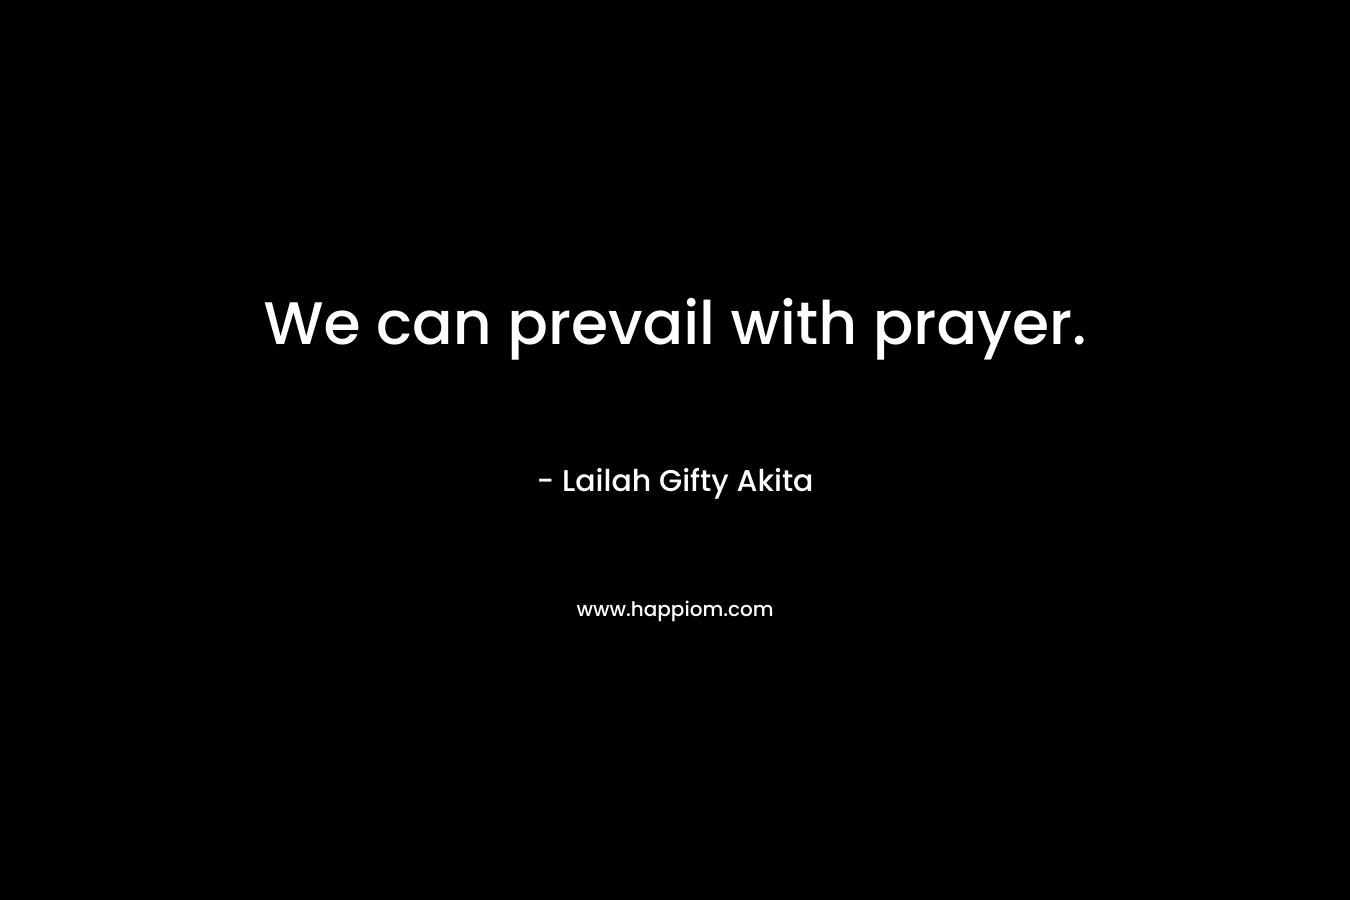 We can prevail with prayer.